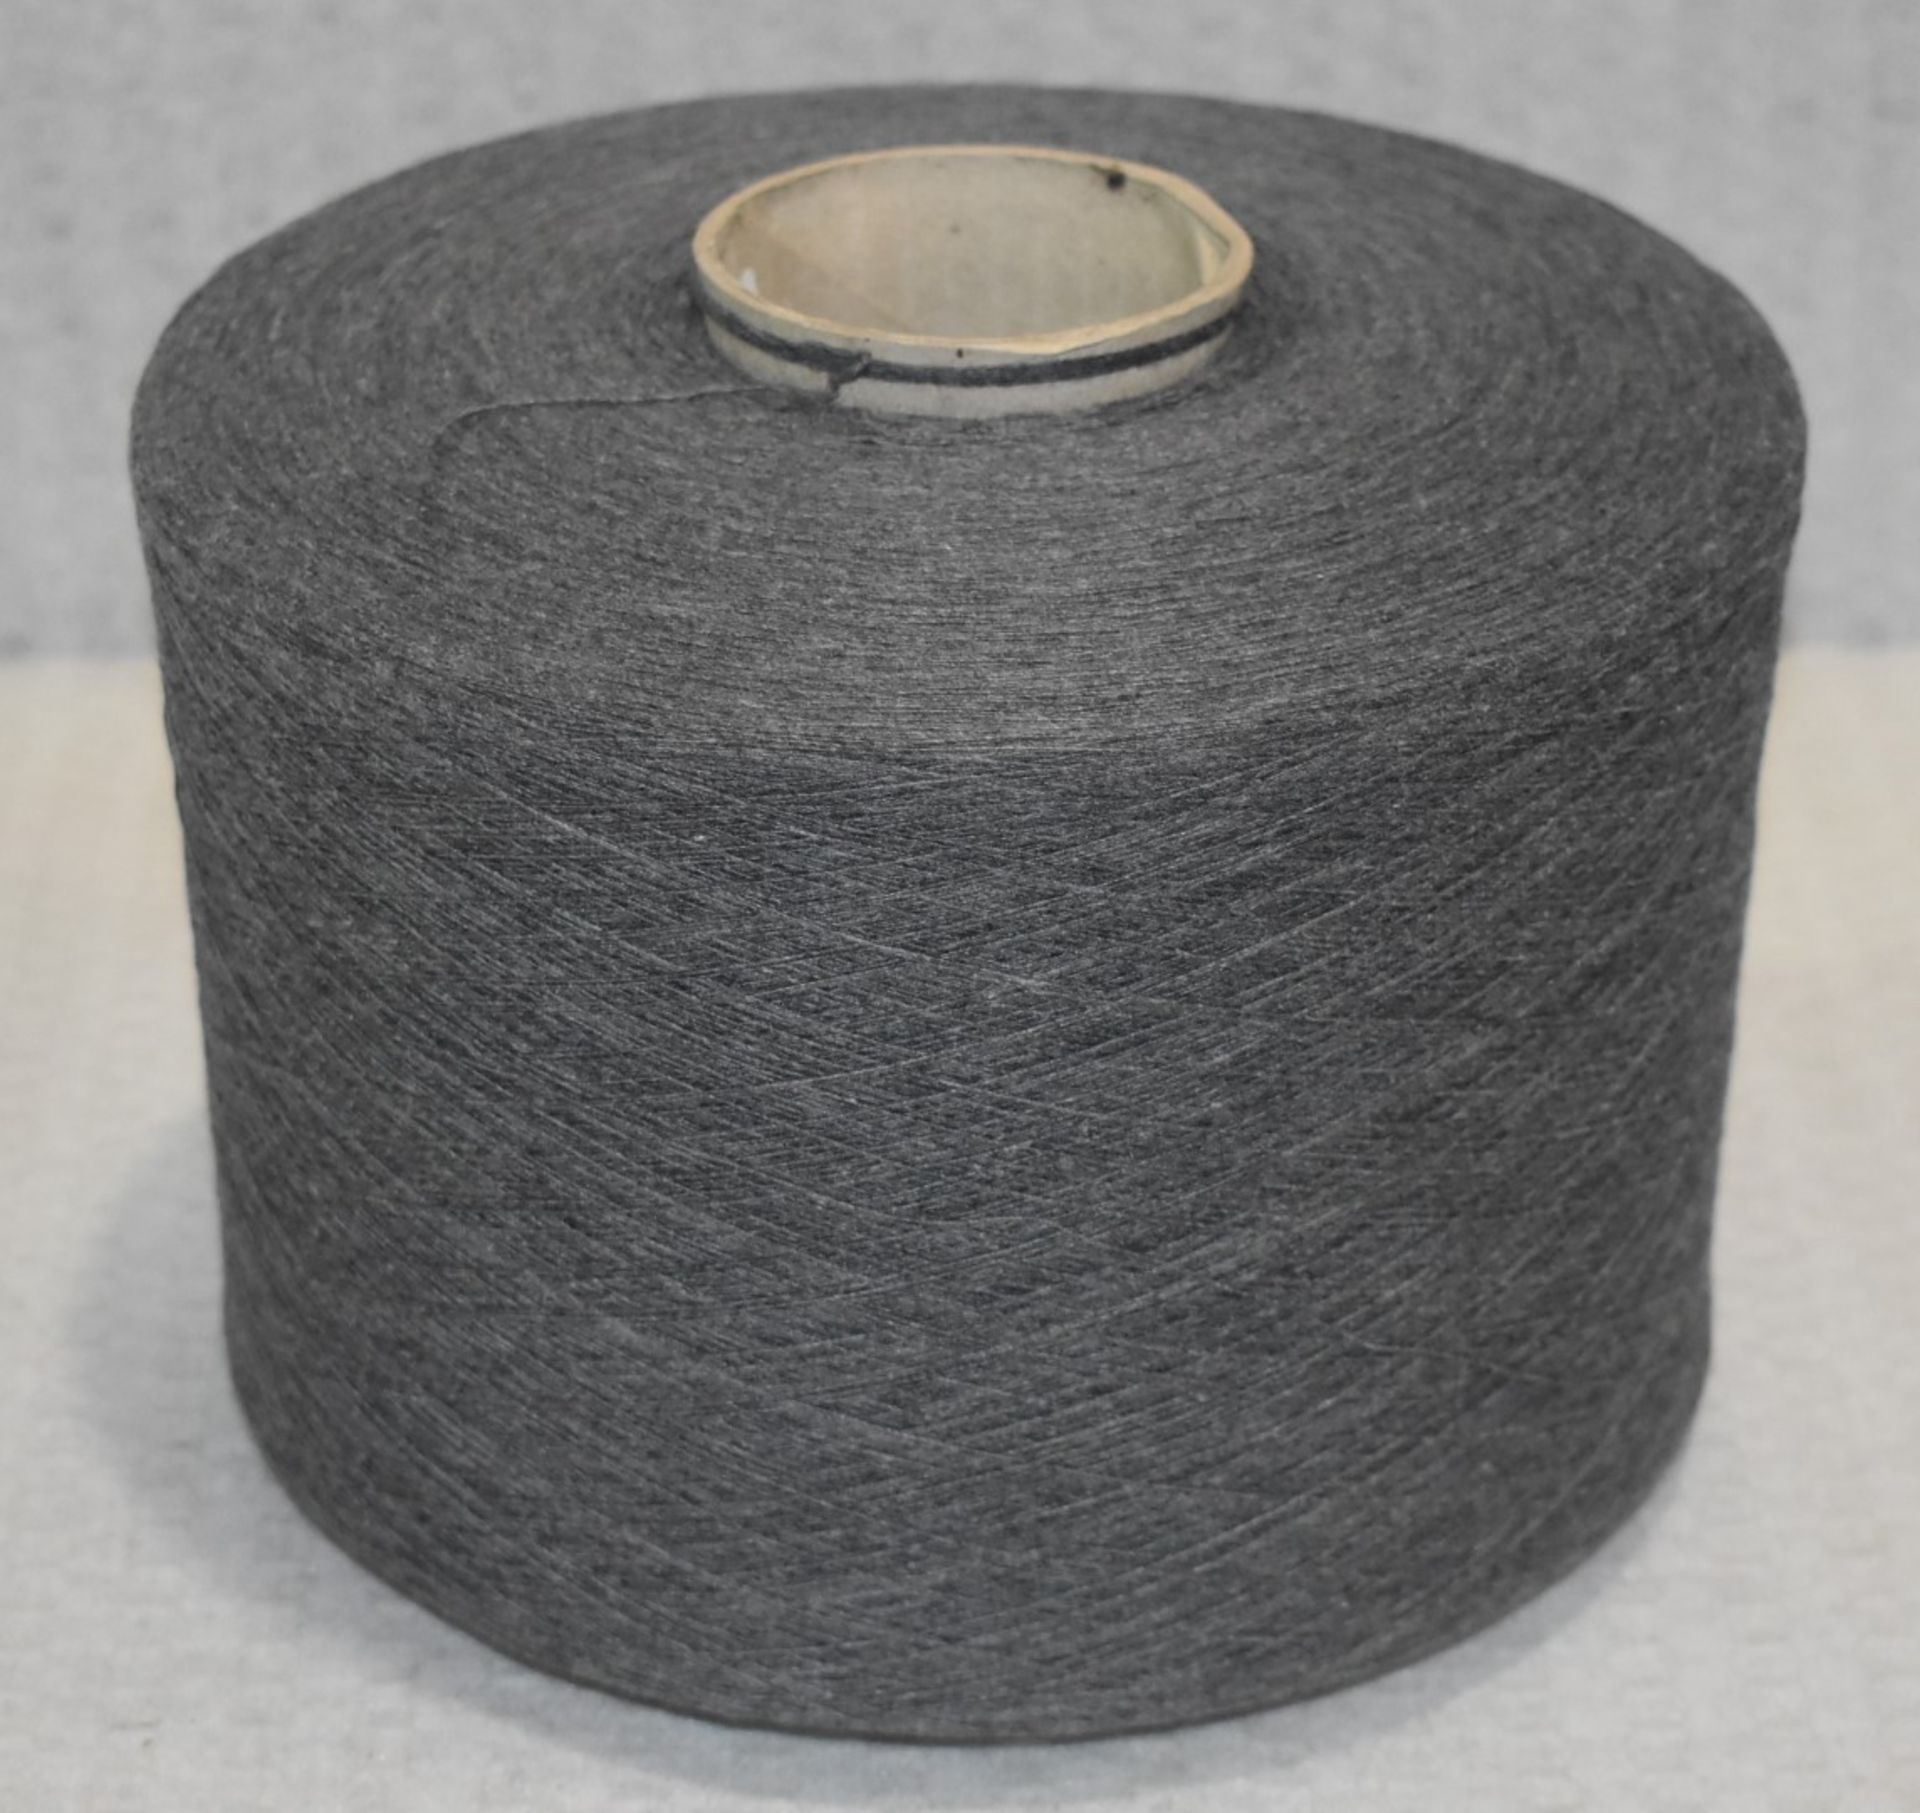 1 x Cone of 1/13 MicroCotton Knitting Yarn - Mid Grey - Approx Weight: 2,500g - New Stock ABL Yarn - Image 7 of 10